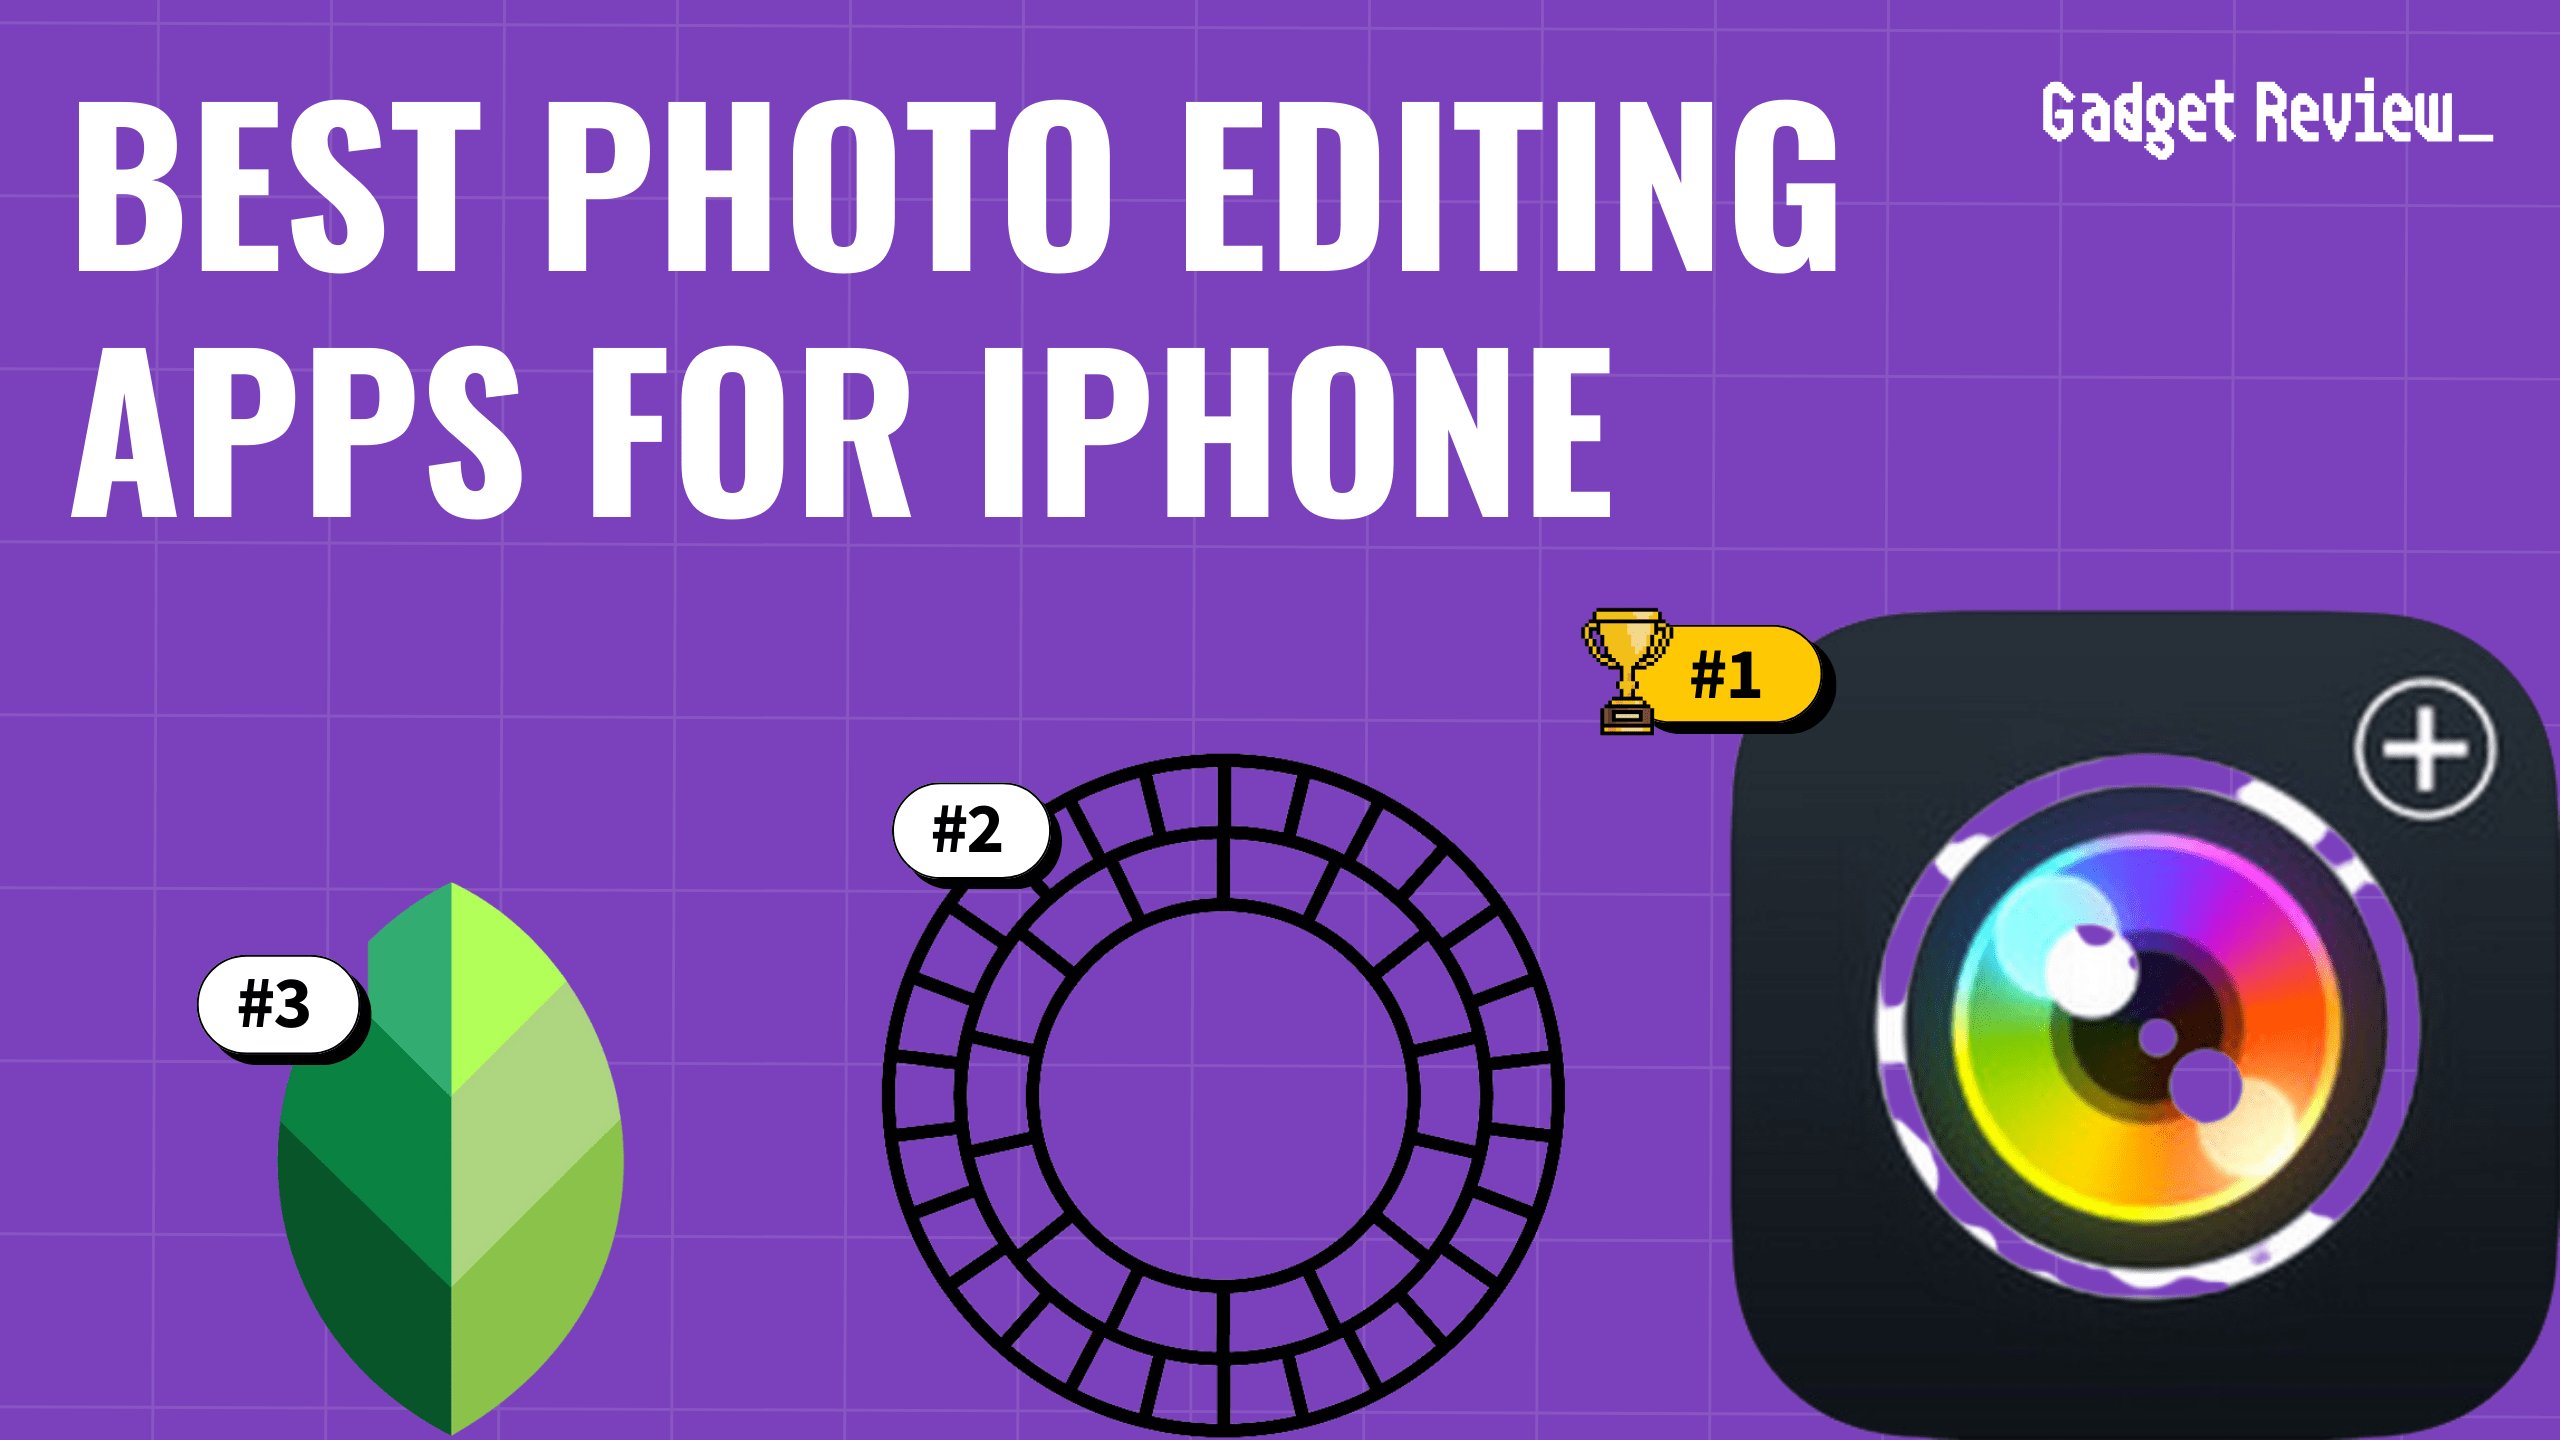 10 of the Best Photo Editing Apps for the iPhone